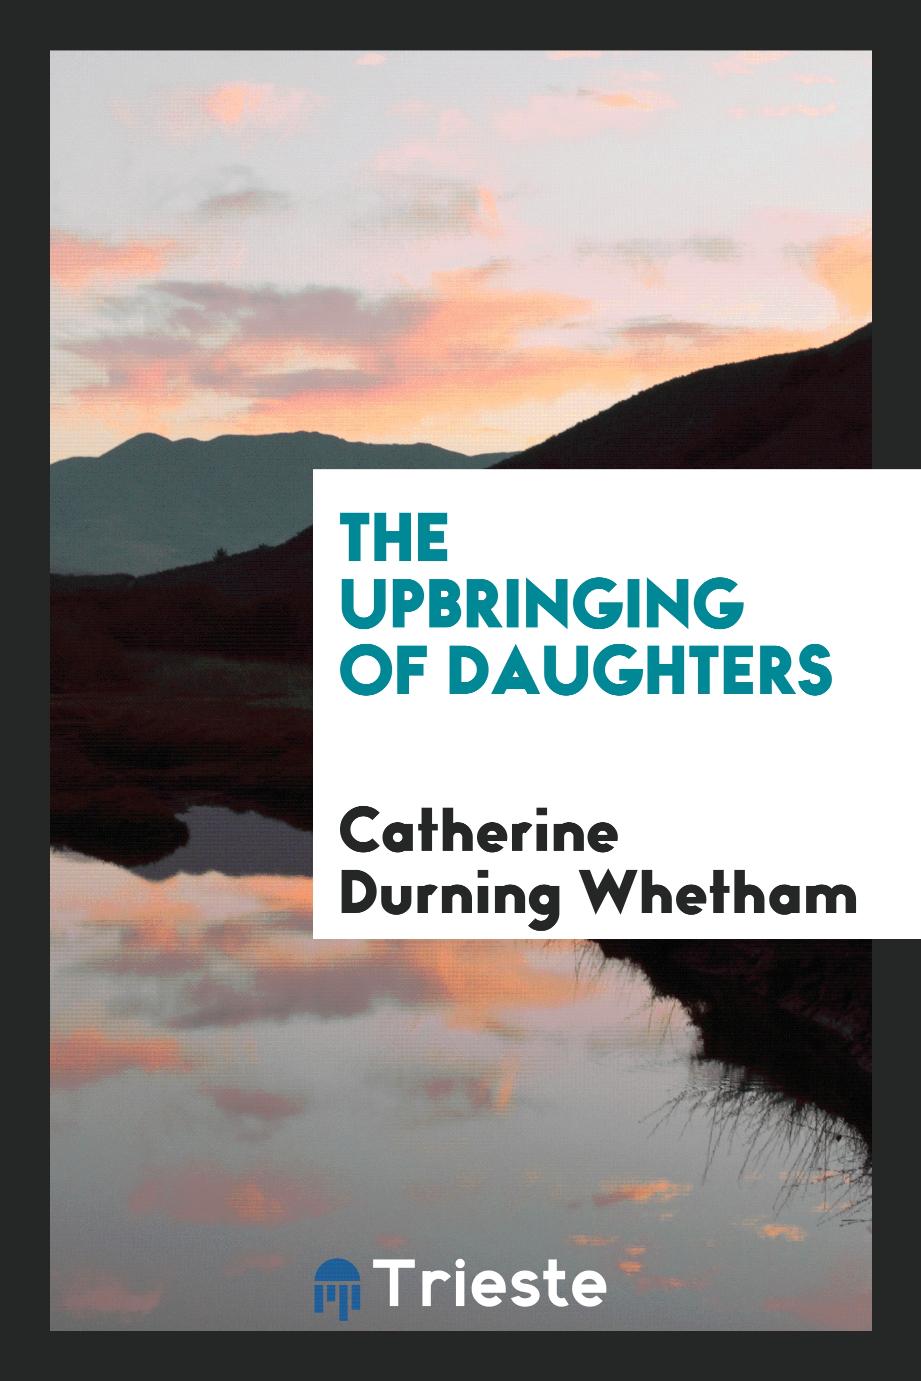 The upbringing of daughters